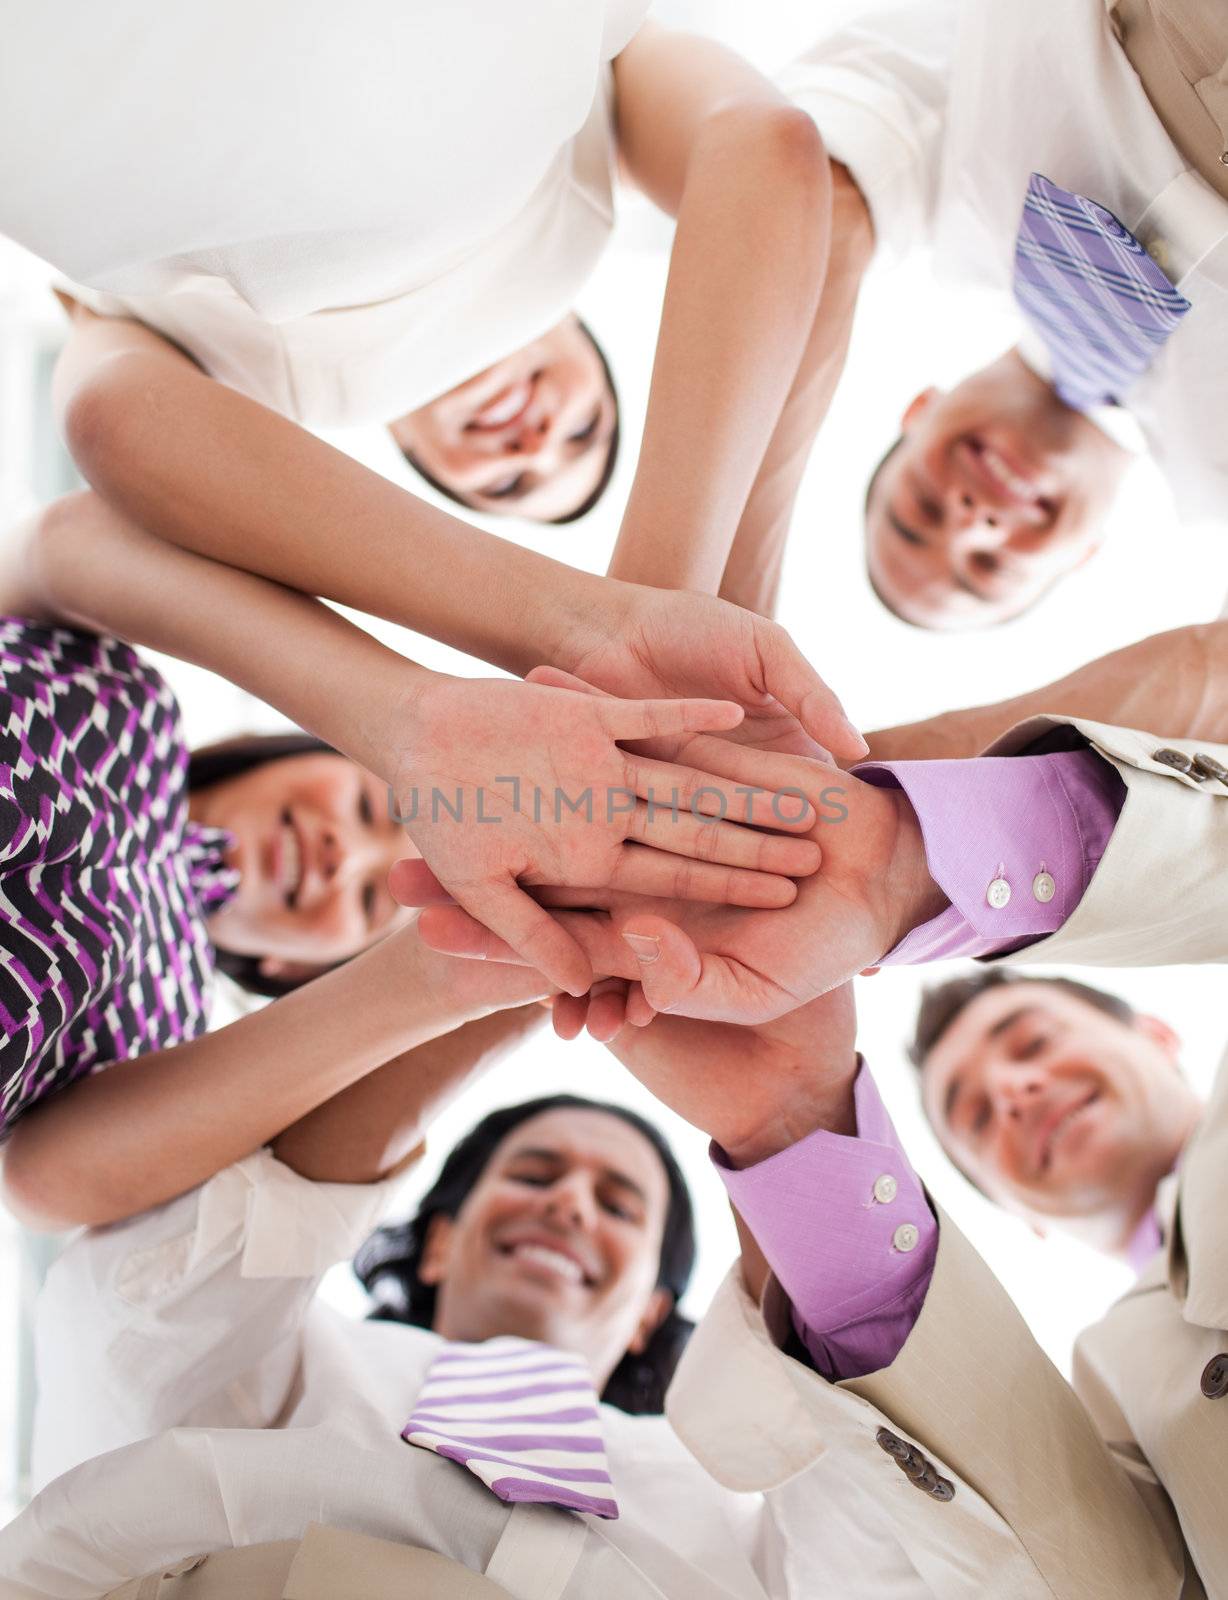 International business people holding hands together against white background
